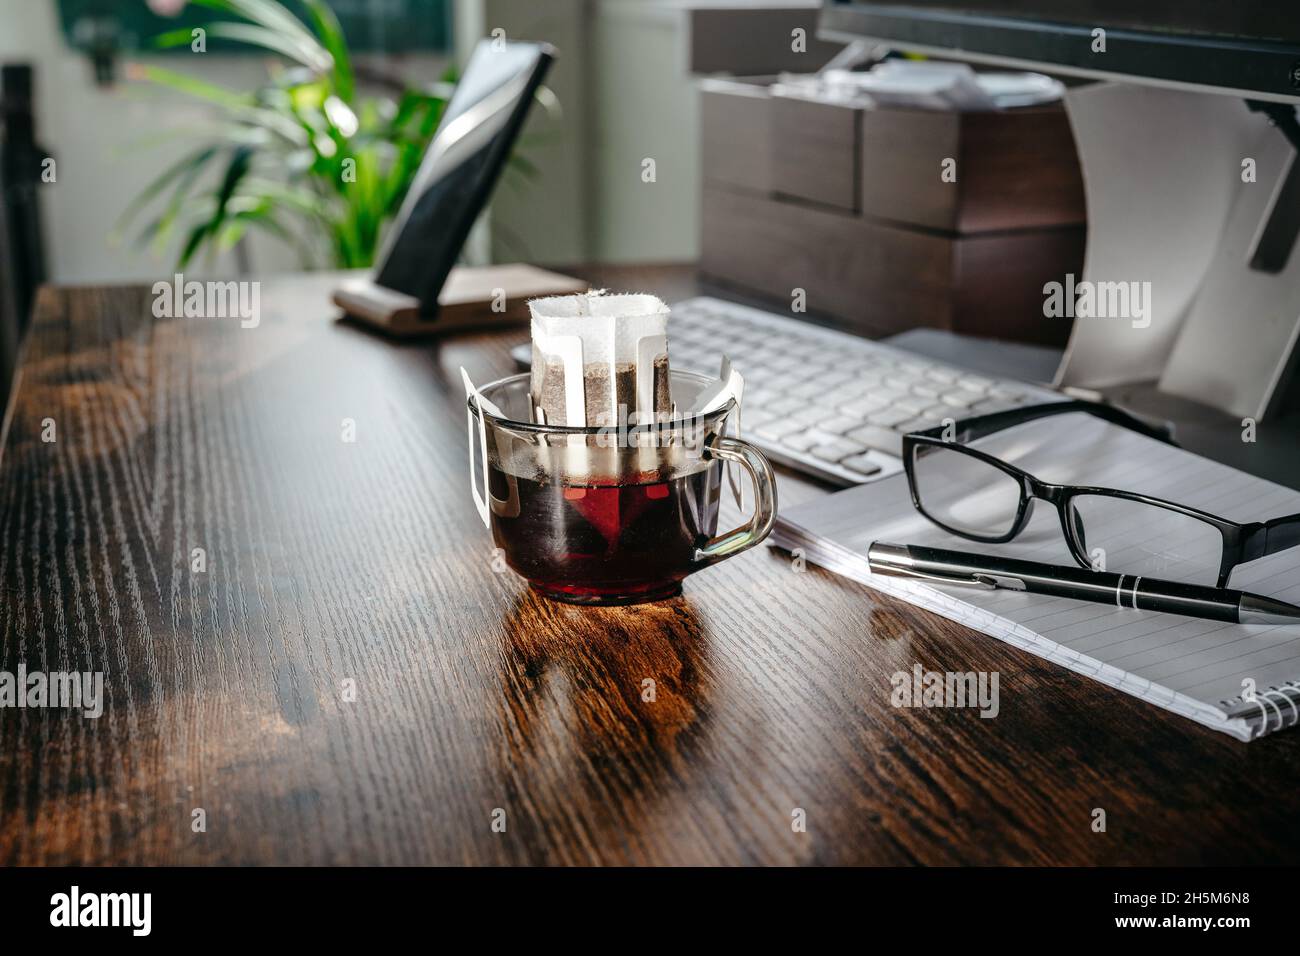 Cup of delicious freshly brewed coffee Stock Photo